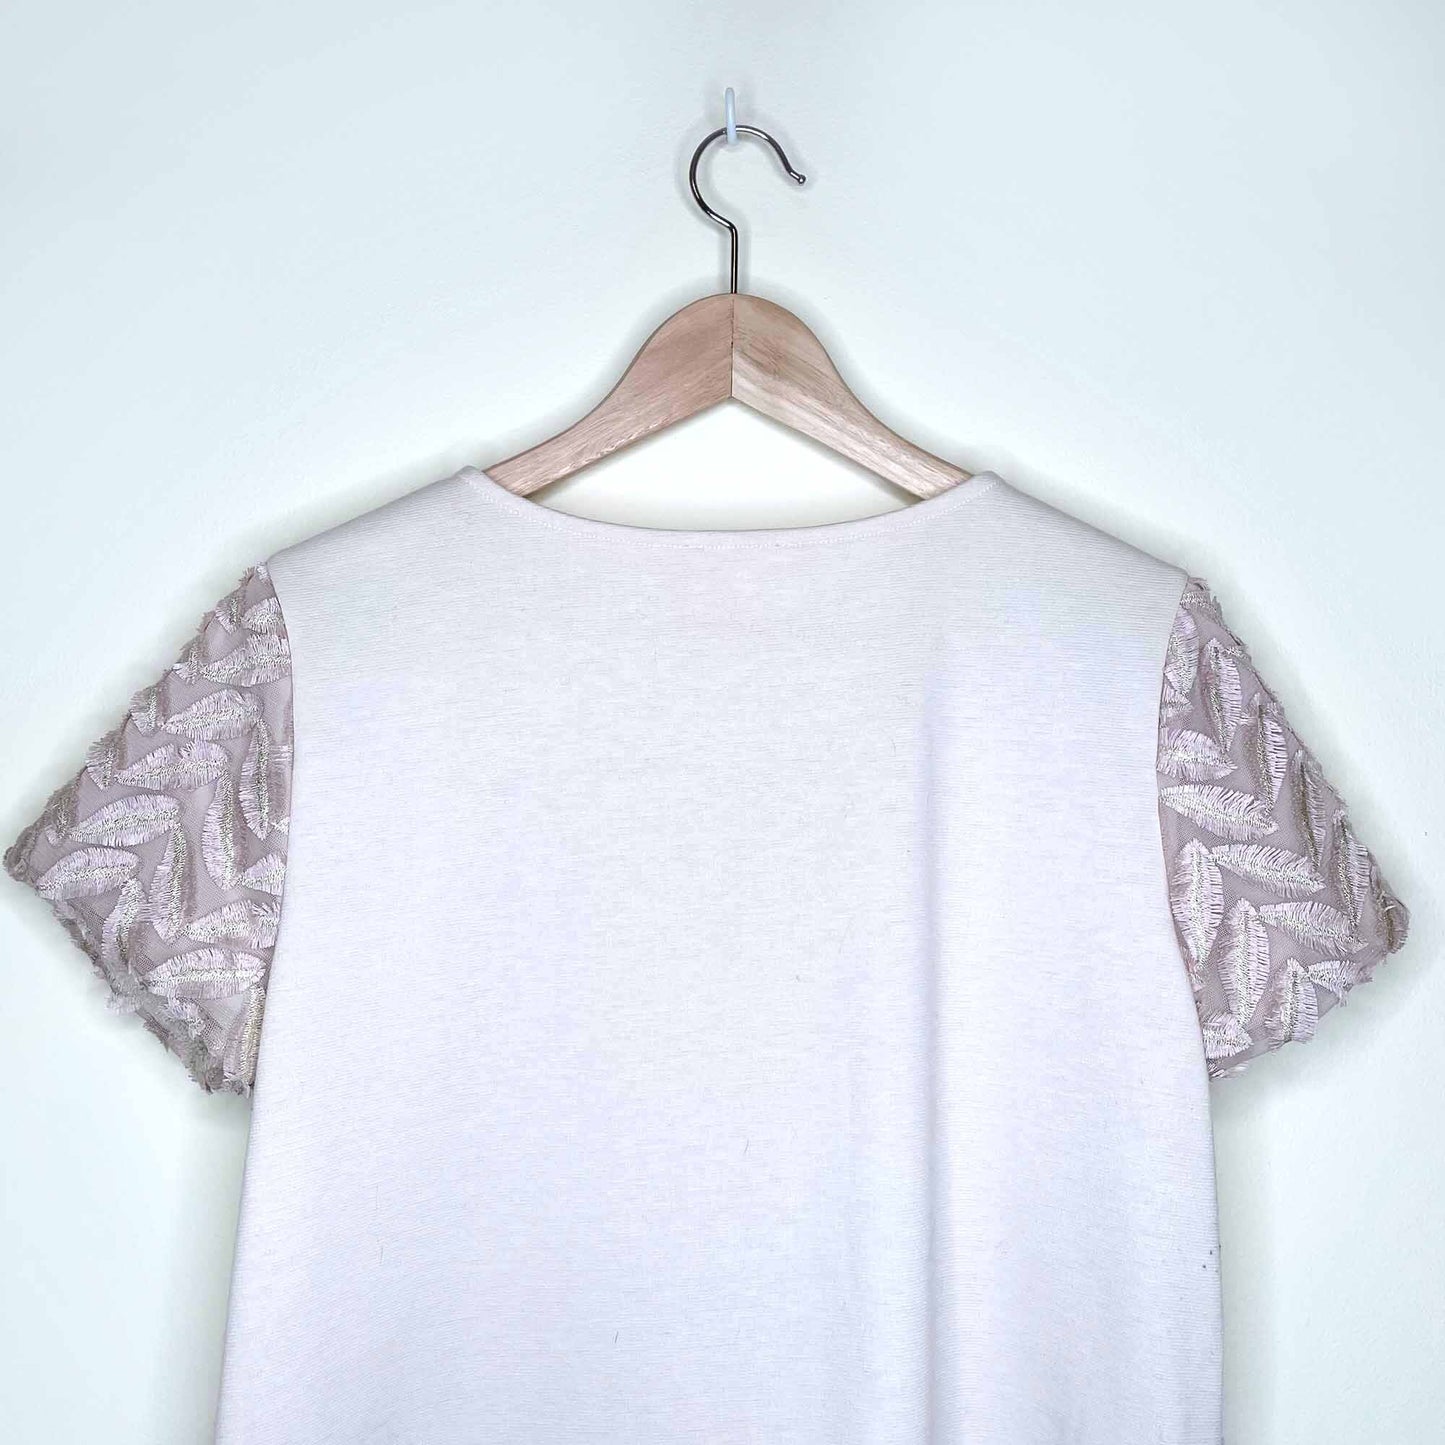 anthropologie weston leaf embroidered top - size large